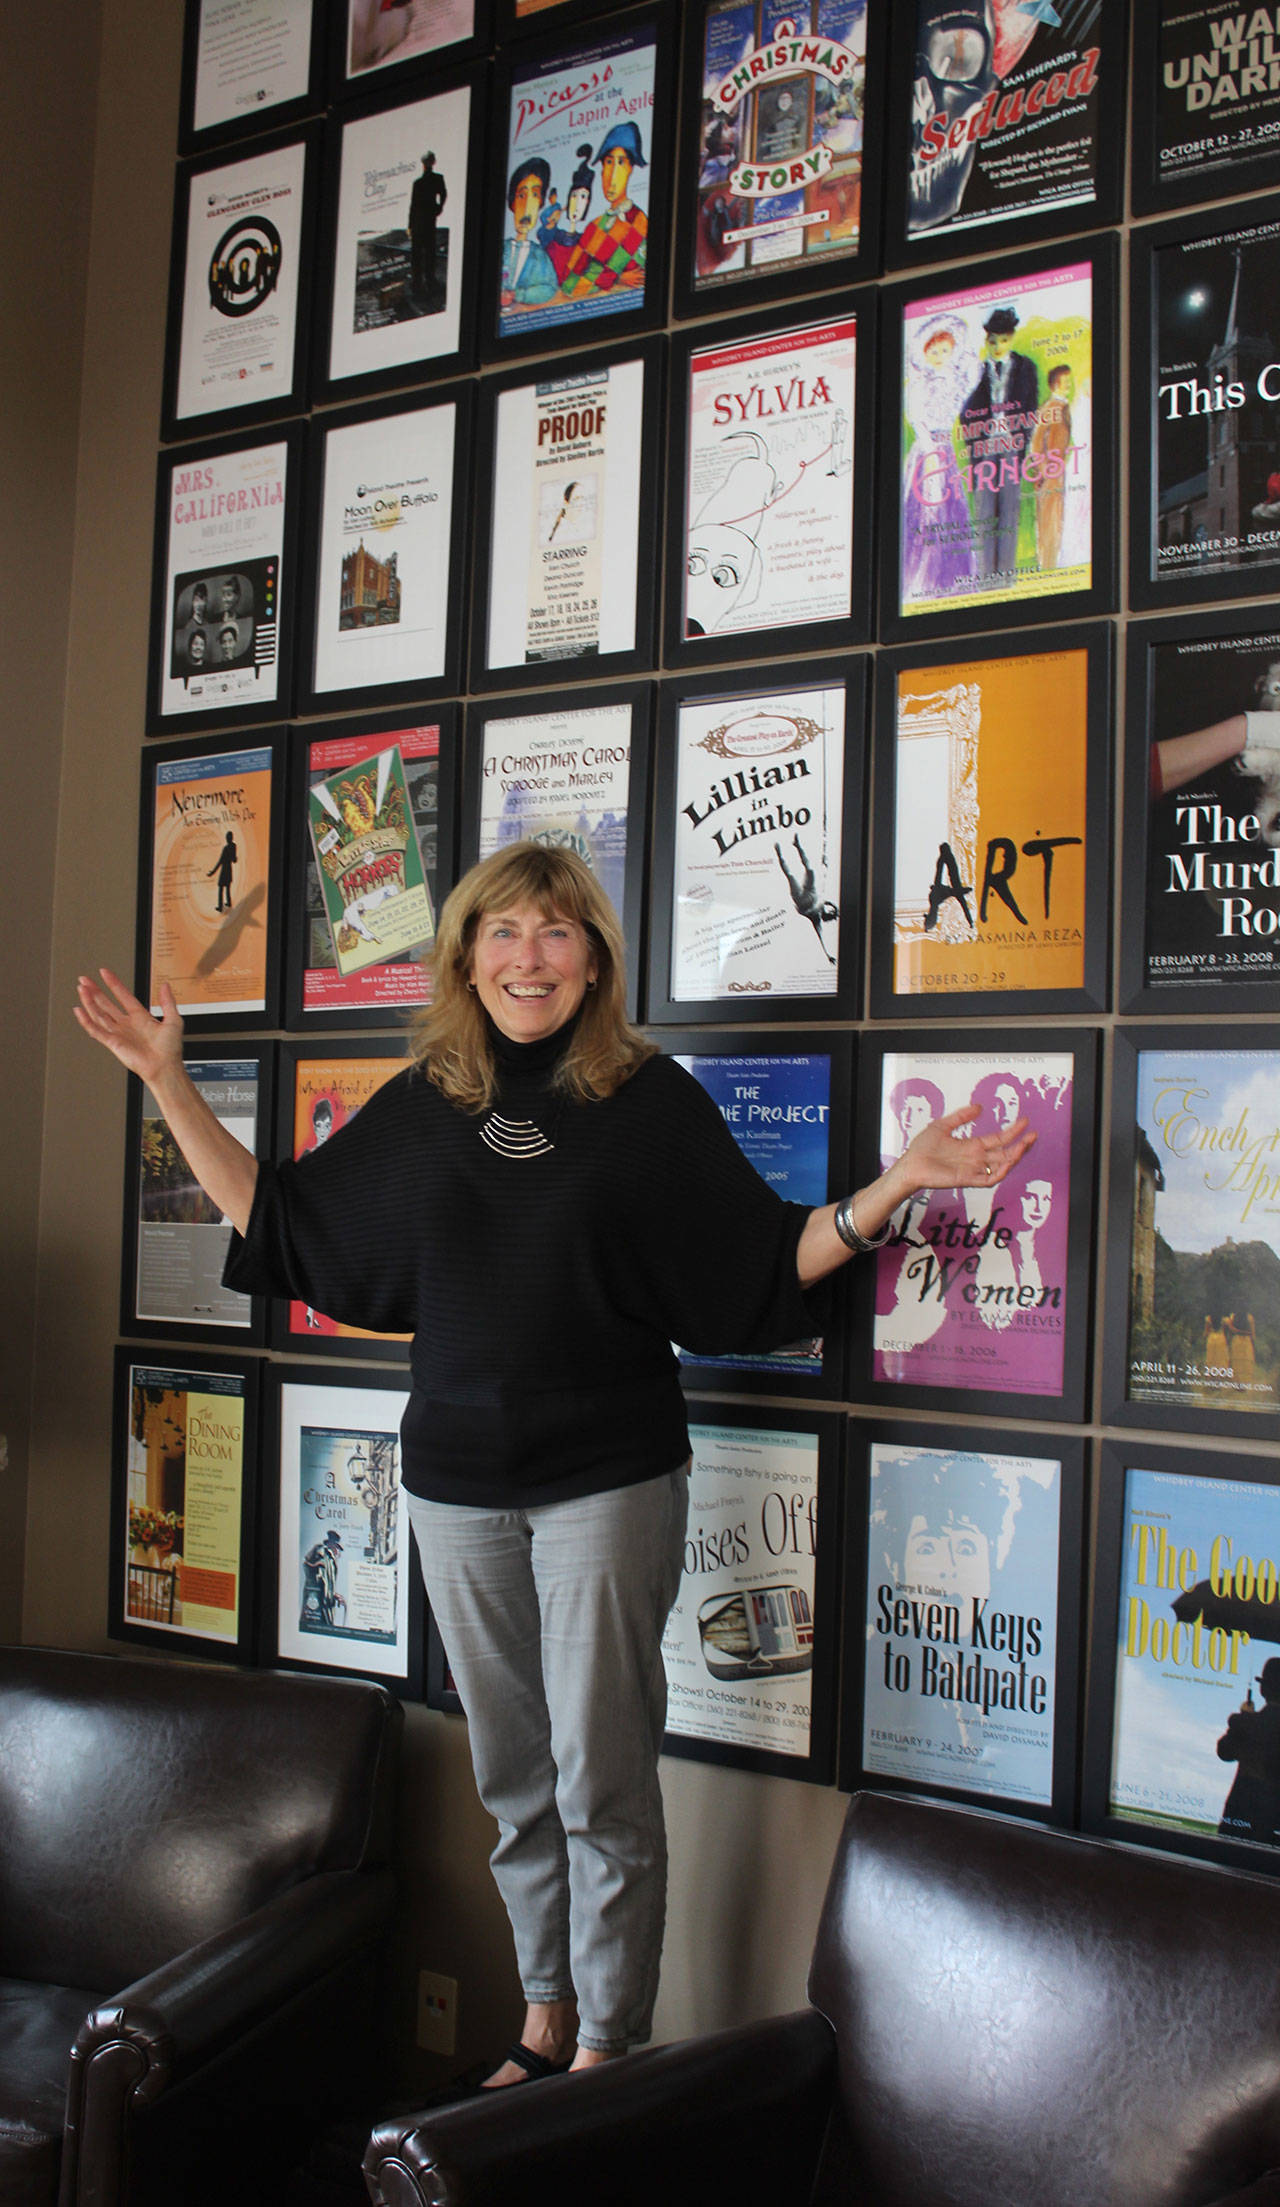 Stacie Burgua, outgoing executive director of Whidbey Island Center for the Arts, stands in front of posters from the more than 75 theater productions staged during her 18-year tenure. (Photo by Patricia Guthrie/Whidbey News Group)